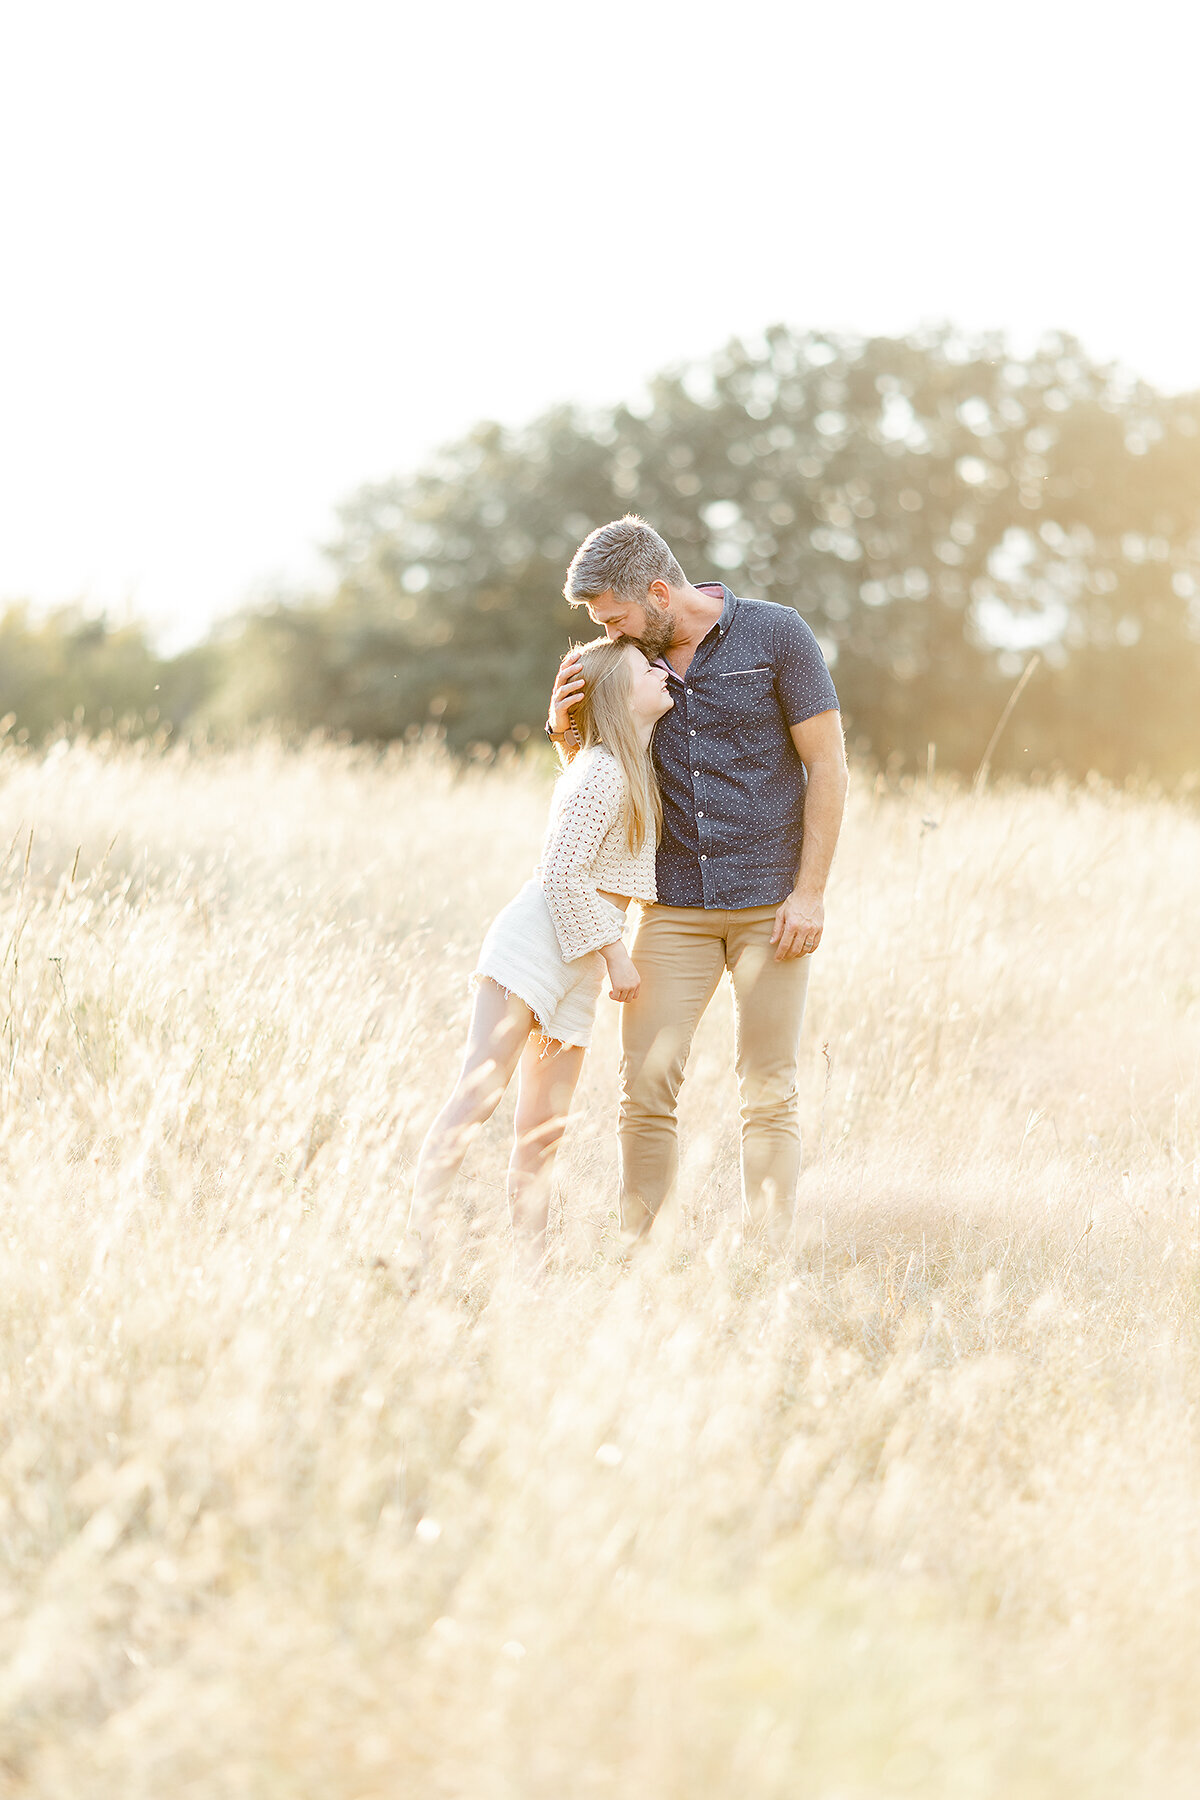 A father and daughter photo in the middle of a field for their family photos.